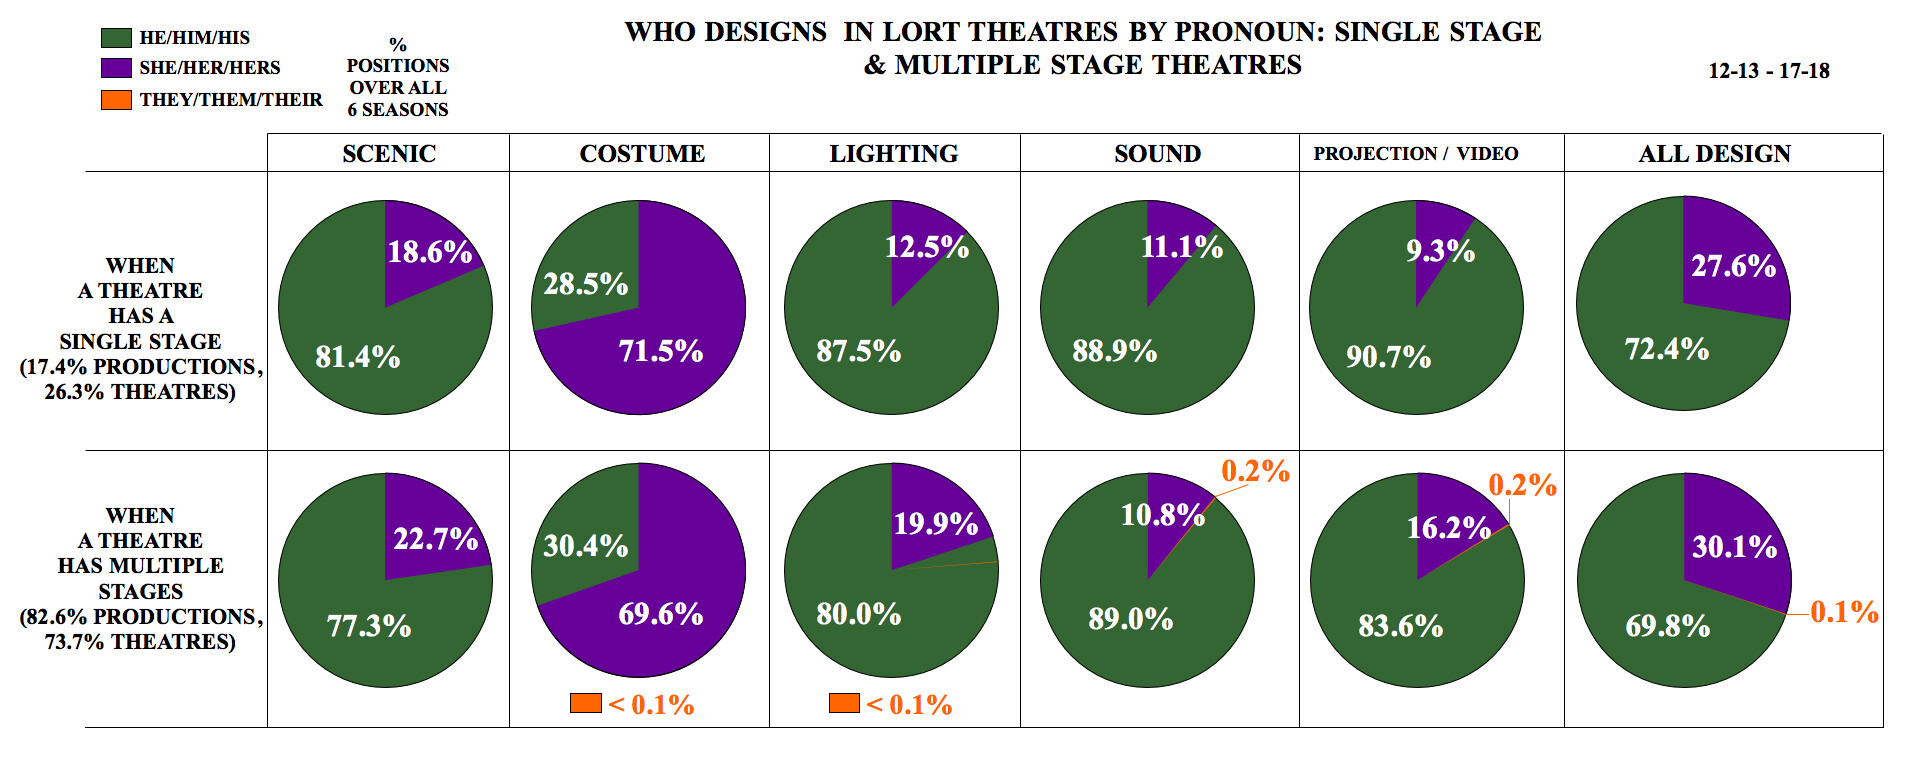 Who Designs in LORT Theatres by Pronoun: Single Stage & Multiple Stage Theatres